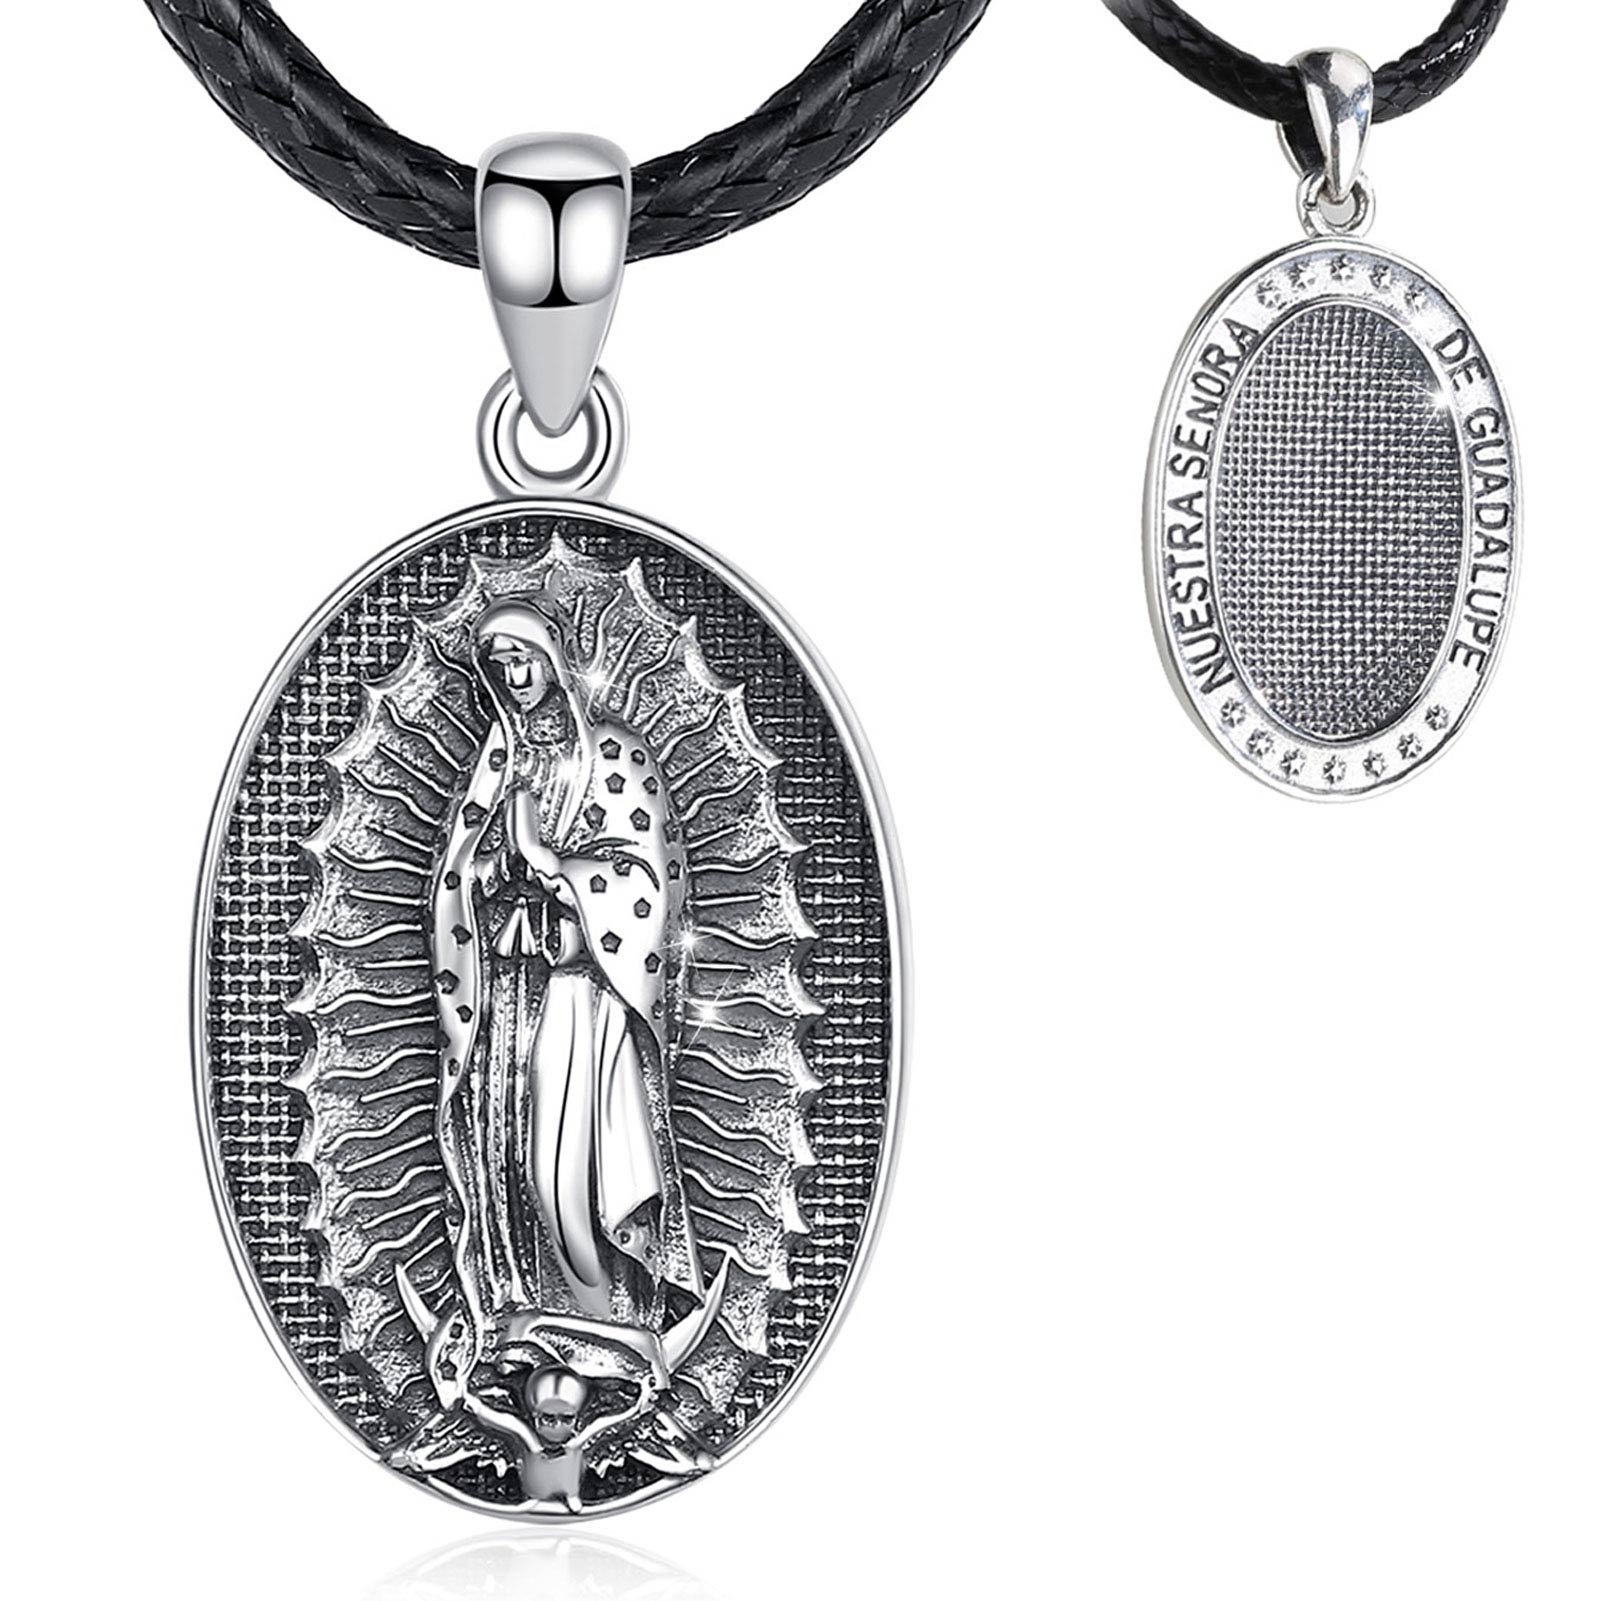 Merryshine S925 Sterling Silver Oval Embossed Guadalupe Trendy Jewelry Pendant Necklace for Gift